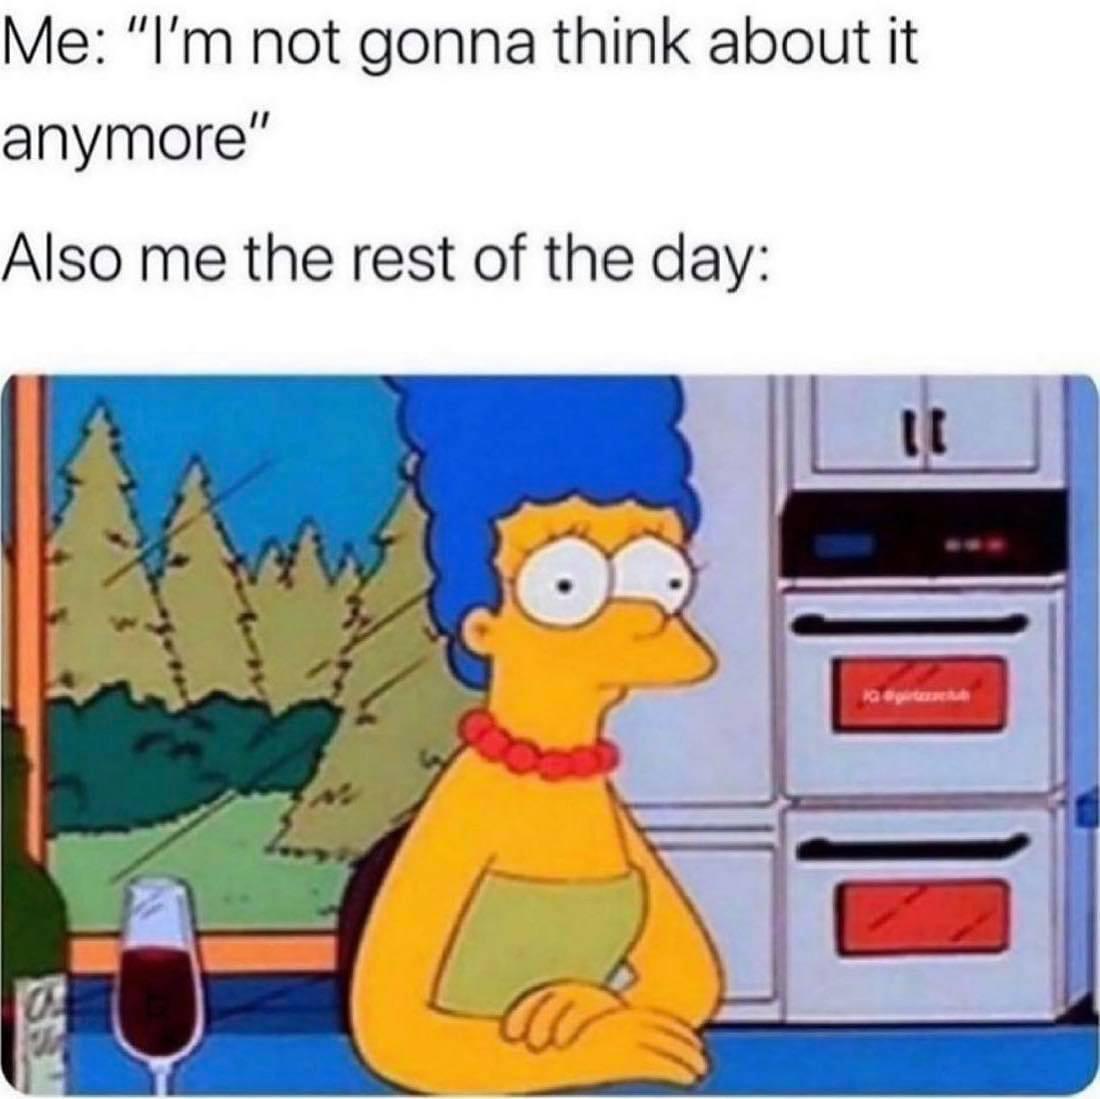 marge simpson wine - Me "I'm not gonna think about it anymore" Also me the rest of the day 10 grub